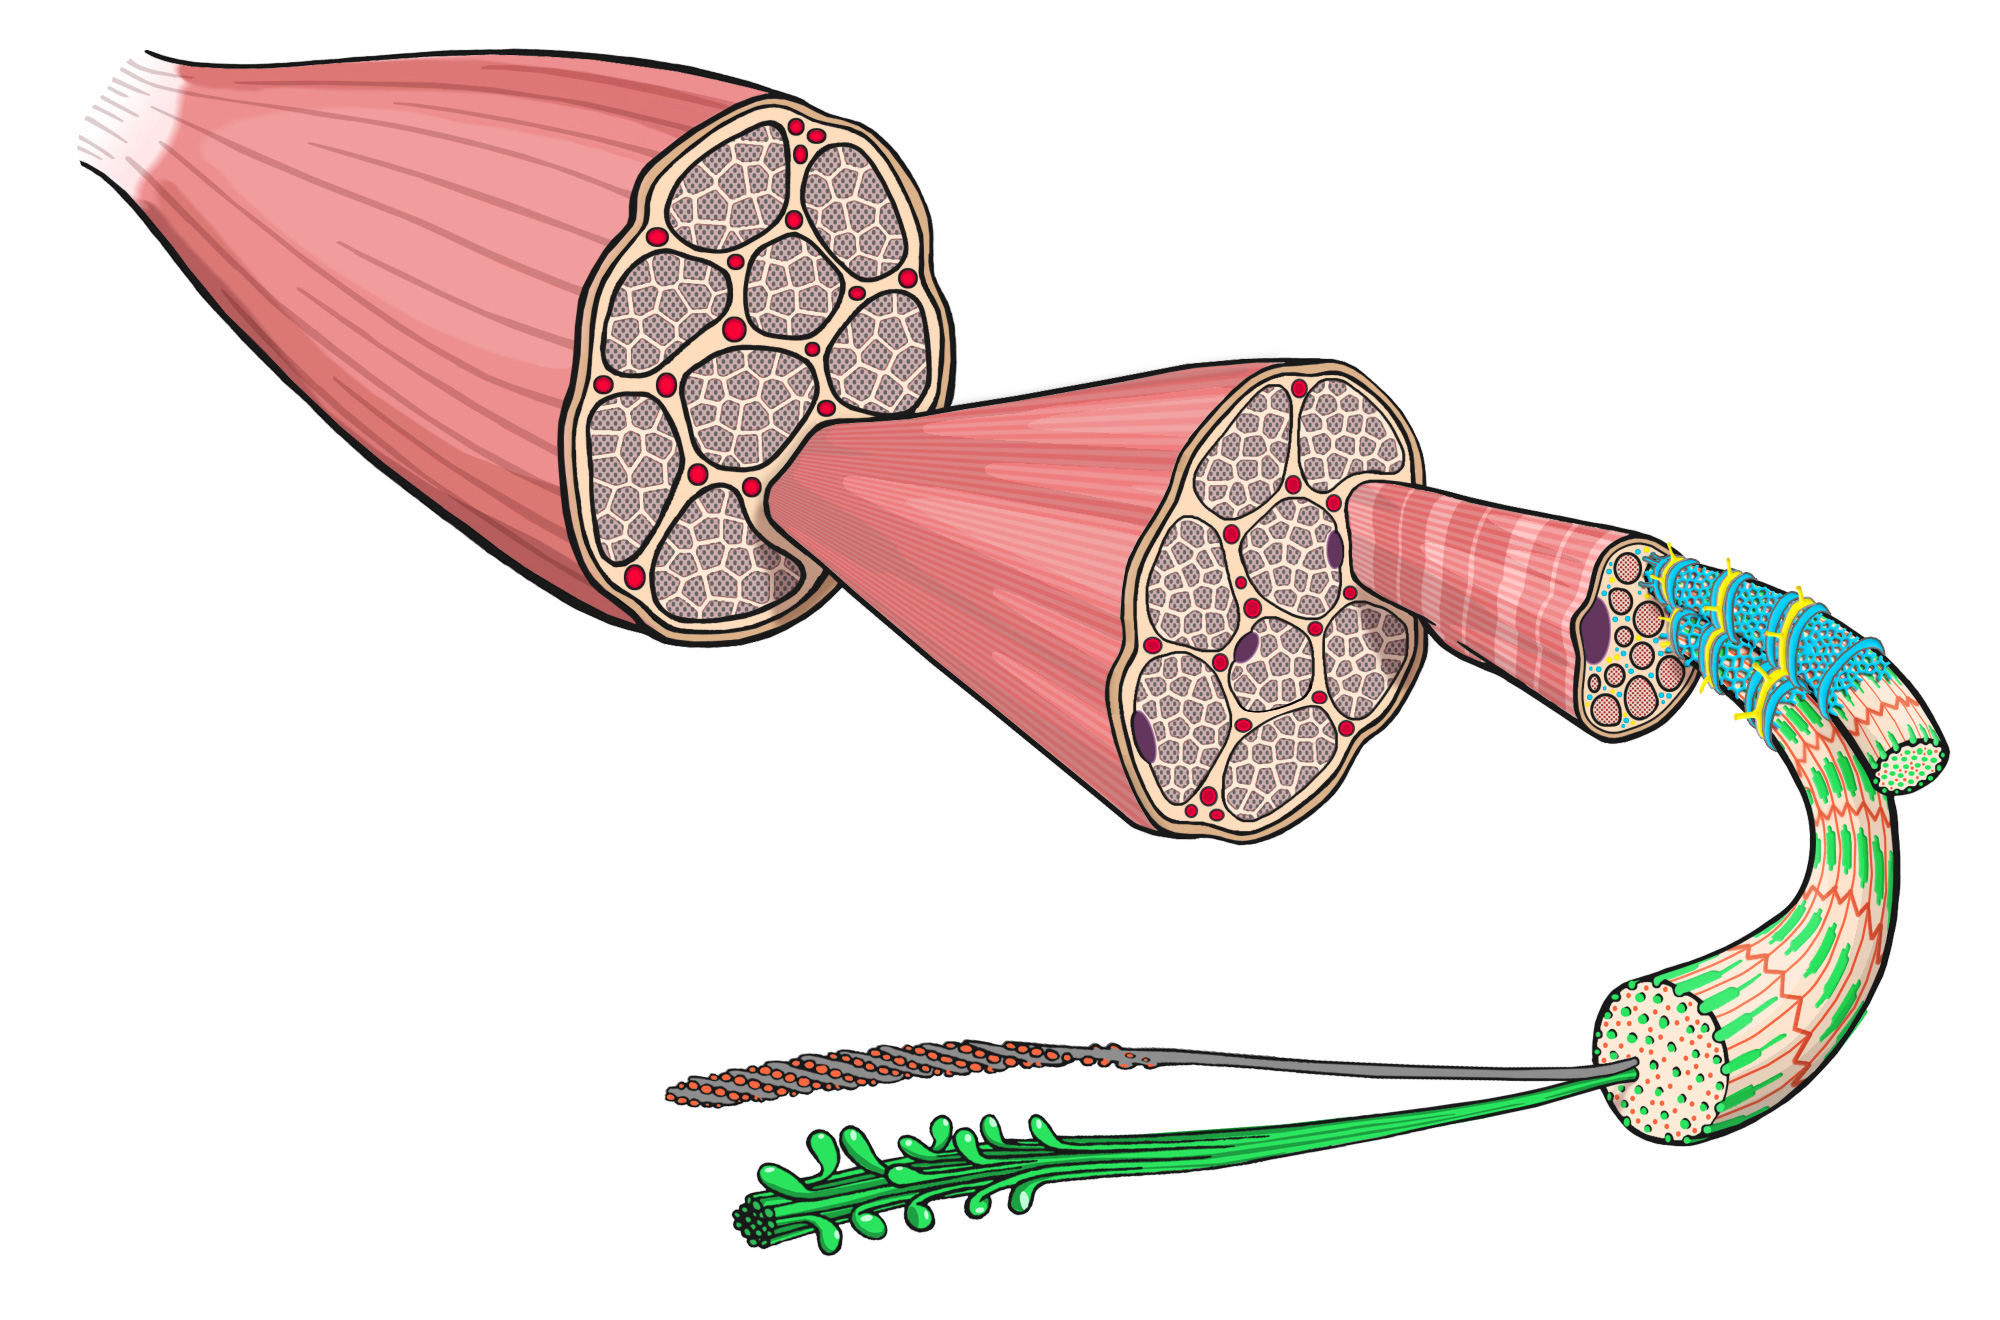 construction of muscle tissue